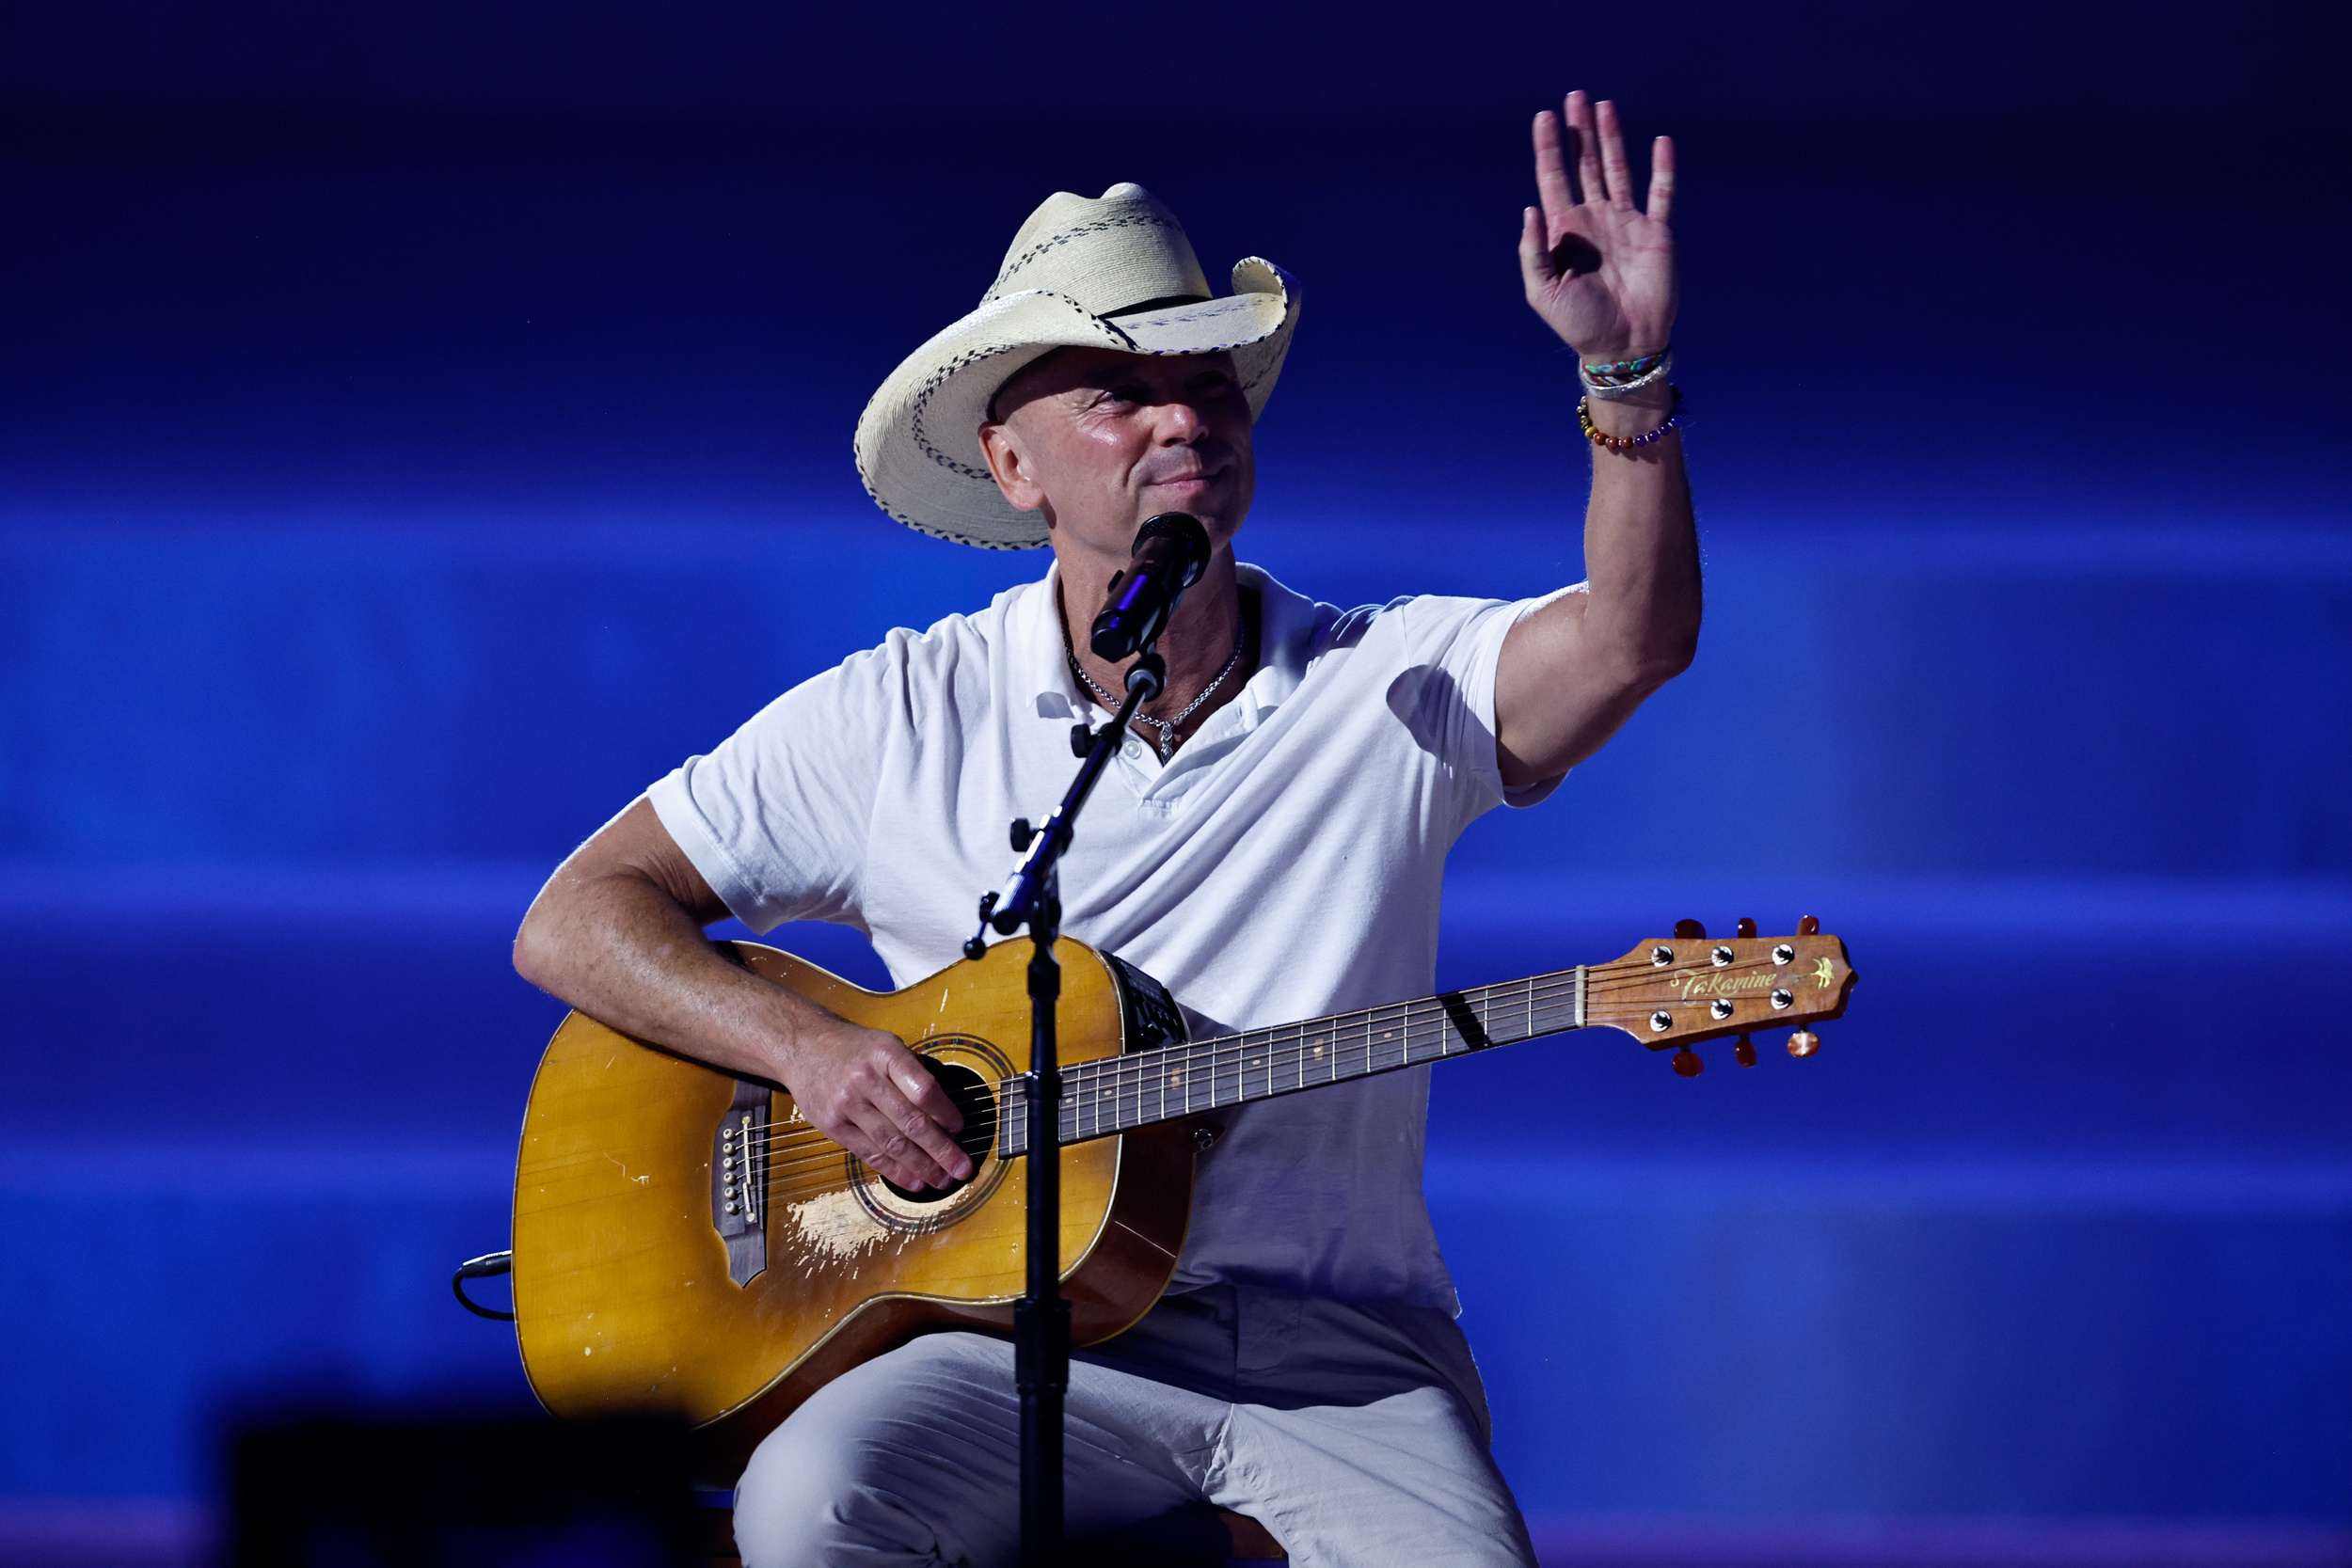 <p>When it comes to hosting a summer musical party, Chesney is a great host. That's why there's likely plenty of fun to be had when Chesney takes the stage this year for a monster stadium tour. <a href="https://www.kennychesney.com/tour">More than 20 stops</a> are scheduled, hitting some of America's biggest venues, like the April 20 opener at Tampa's Raymond James Stadium, Chicago's Soldier Field, AT&T Stadium in suburban Dallas and SoFi Stadium in the greater Los Angeles proper. The Zac Brown Band will tag along for fun, making this a must-see concert event for country music fans.</p><p>You may also like: <a href='https://www.yardbarker.com/entertainment/articles/great_soundtracks_from_obscure_or_underrated_movies_030424/s1__39830162'>Great soundtracks from obscure or underrated movies</a></p>